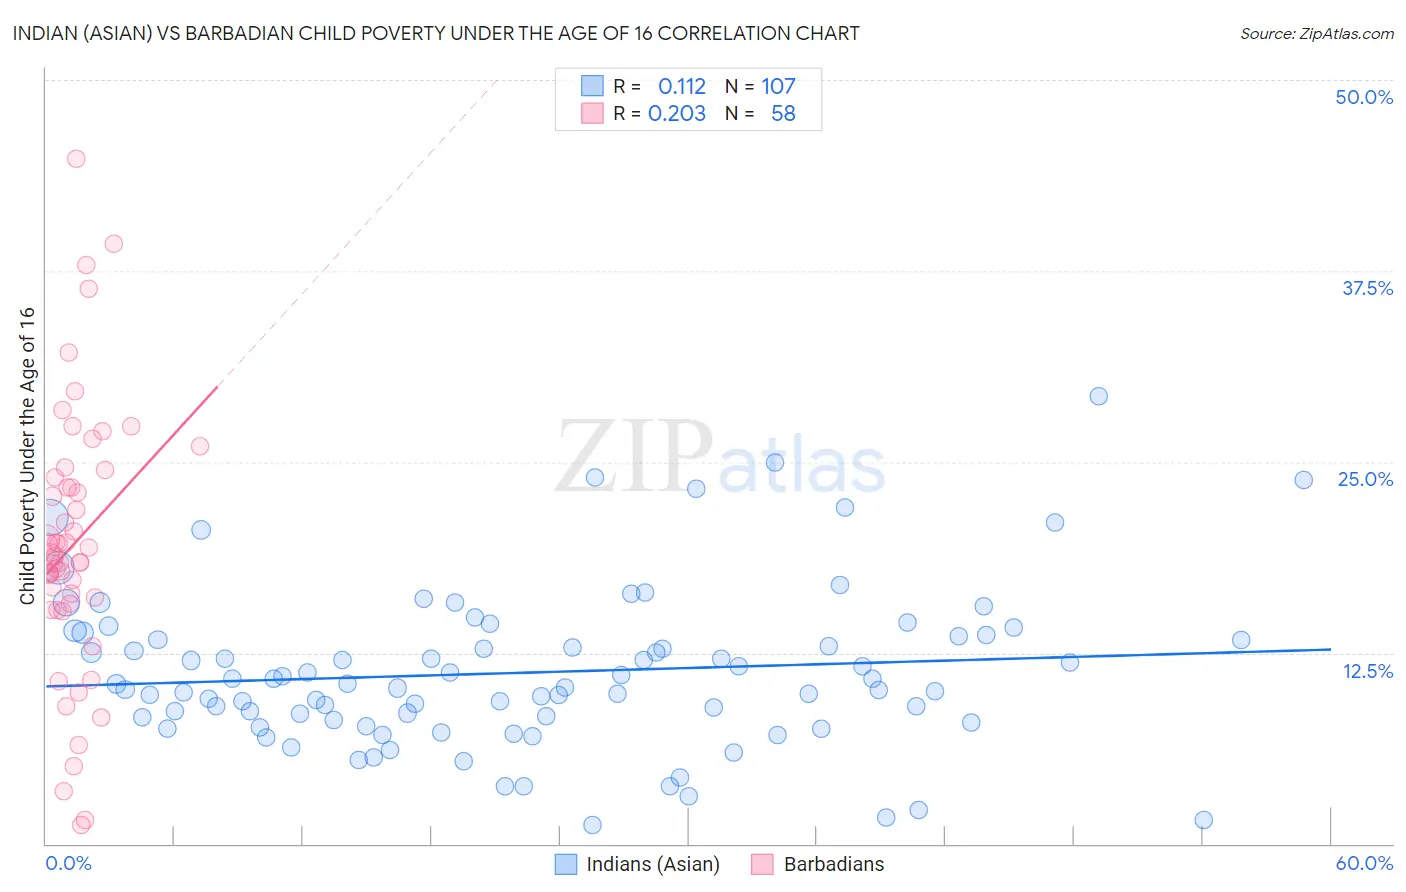 Indian (Asian) vs Barbadian Child Poverty Under the Age of 16